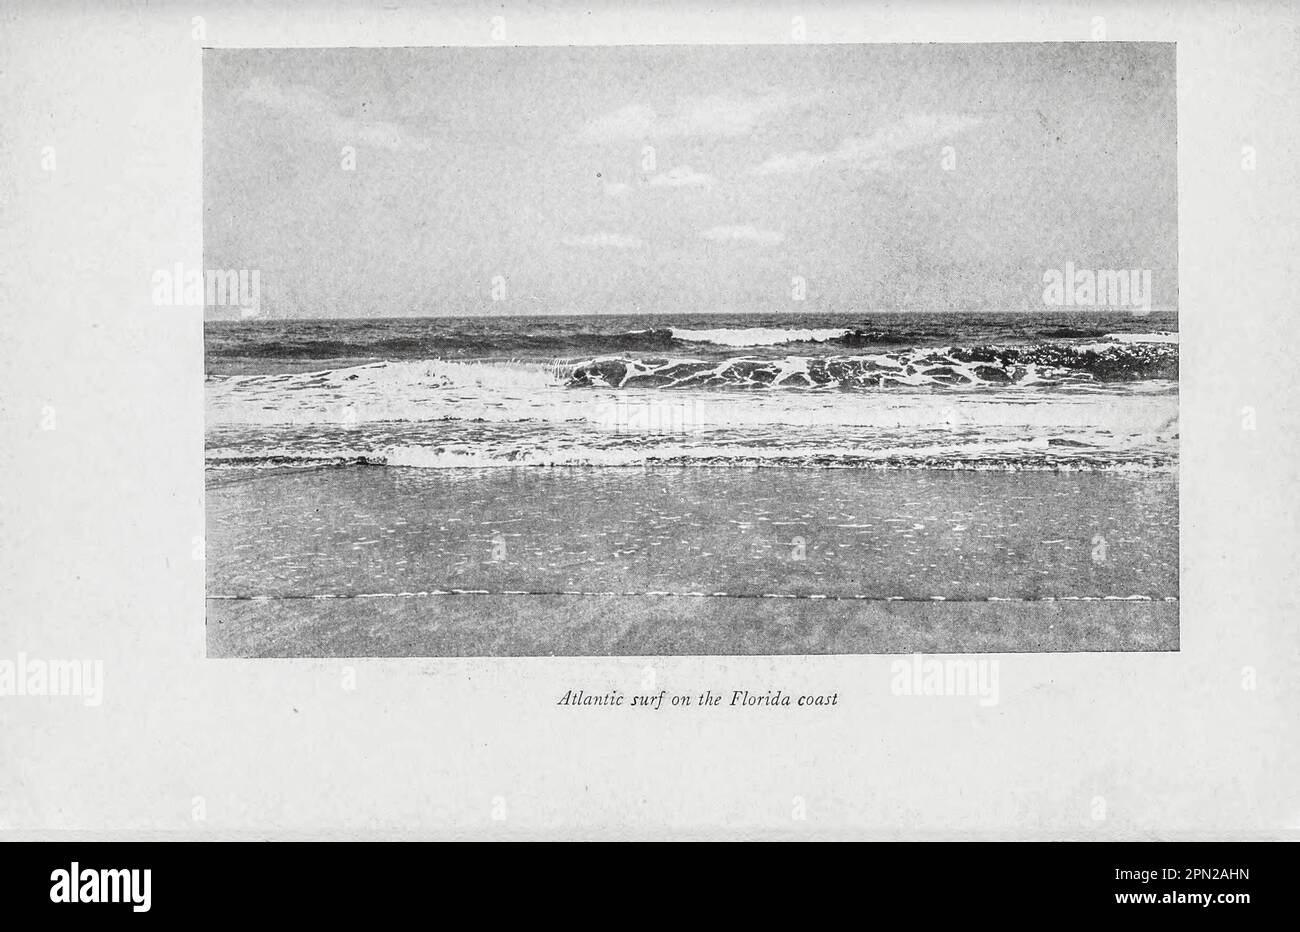 Atlantic Surf on the Florida Coast aus dem Buch ' Highways and Byways of Florida; Human Interest information for Travellers in Florida ' von Clifton Johnson, 1865-1940 Publisher 1918 New York, The Macmillan Company; Stockfoto